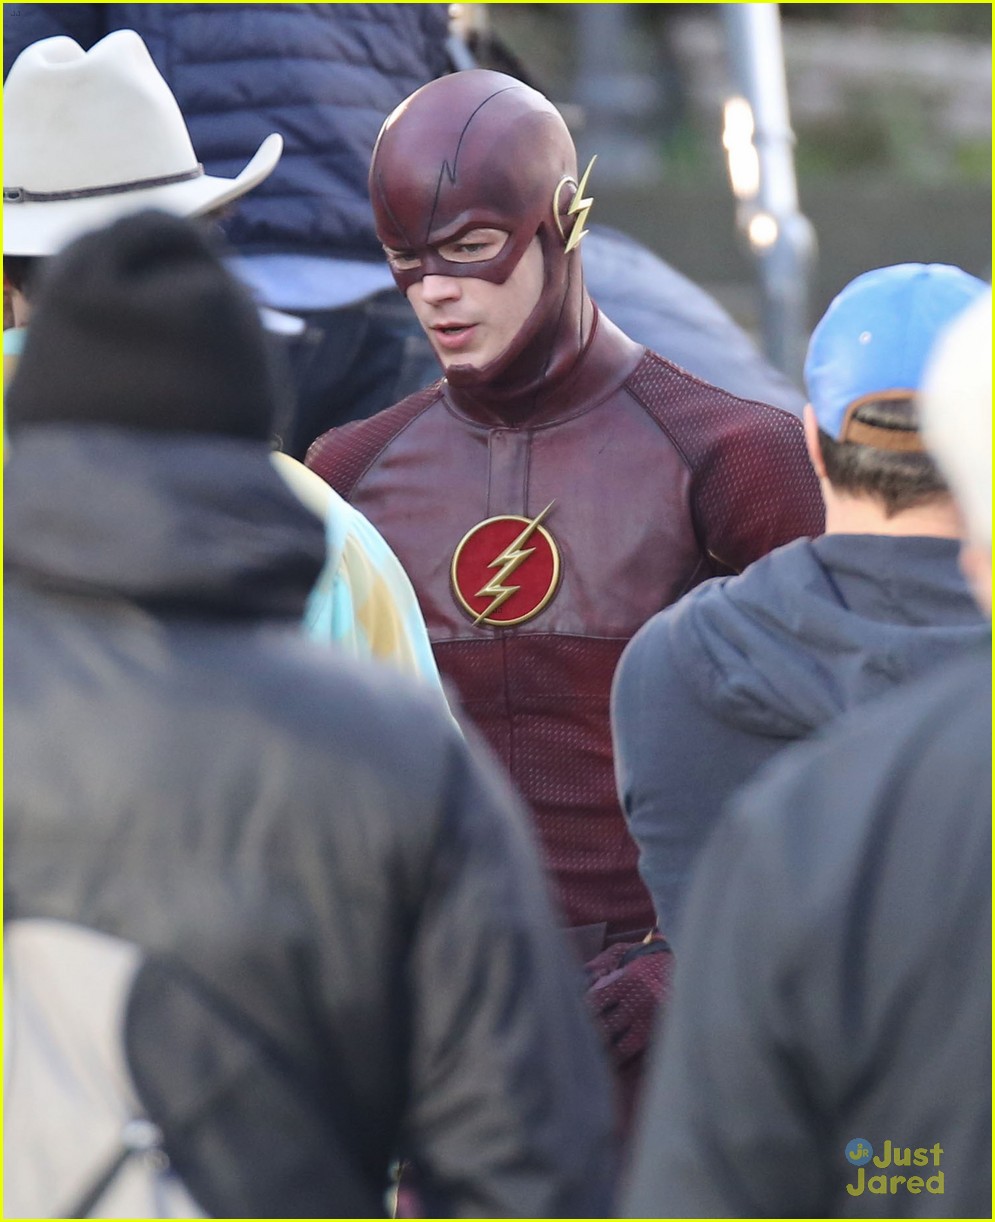 Grant Gustin Films Scenes In The Flash Costume First Look Photo